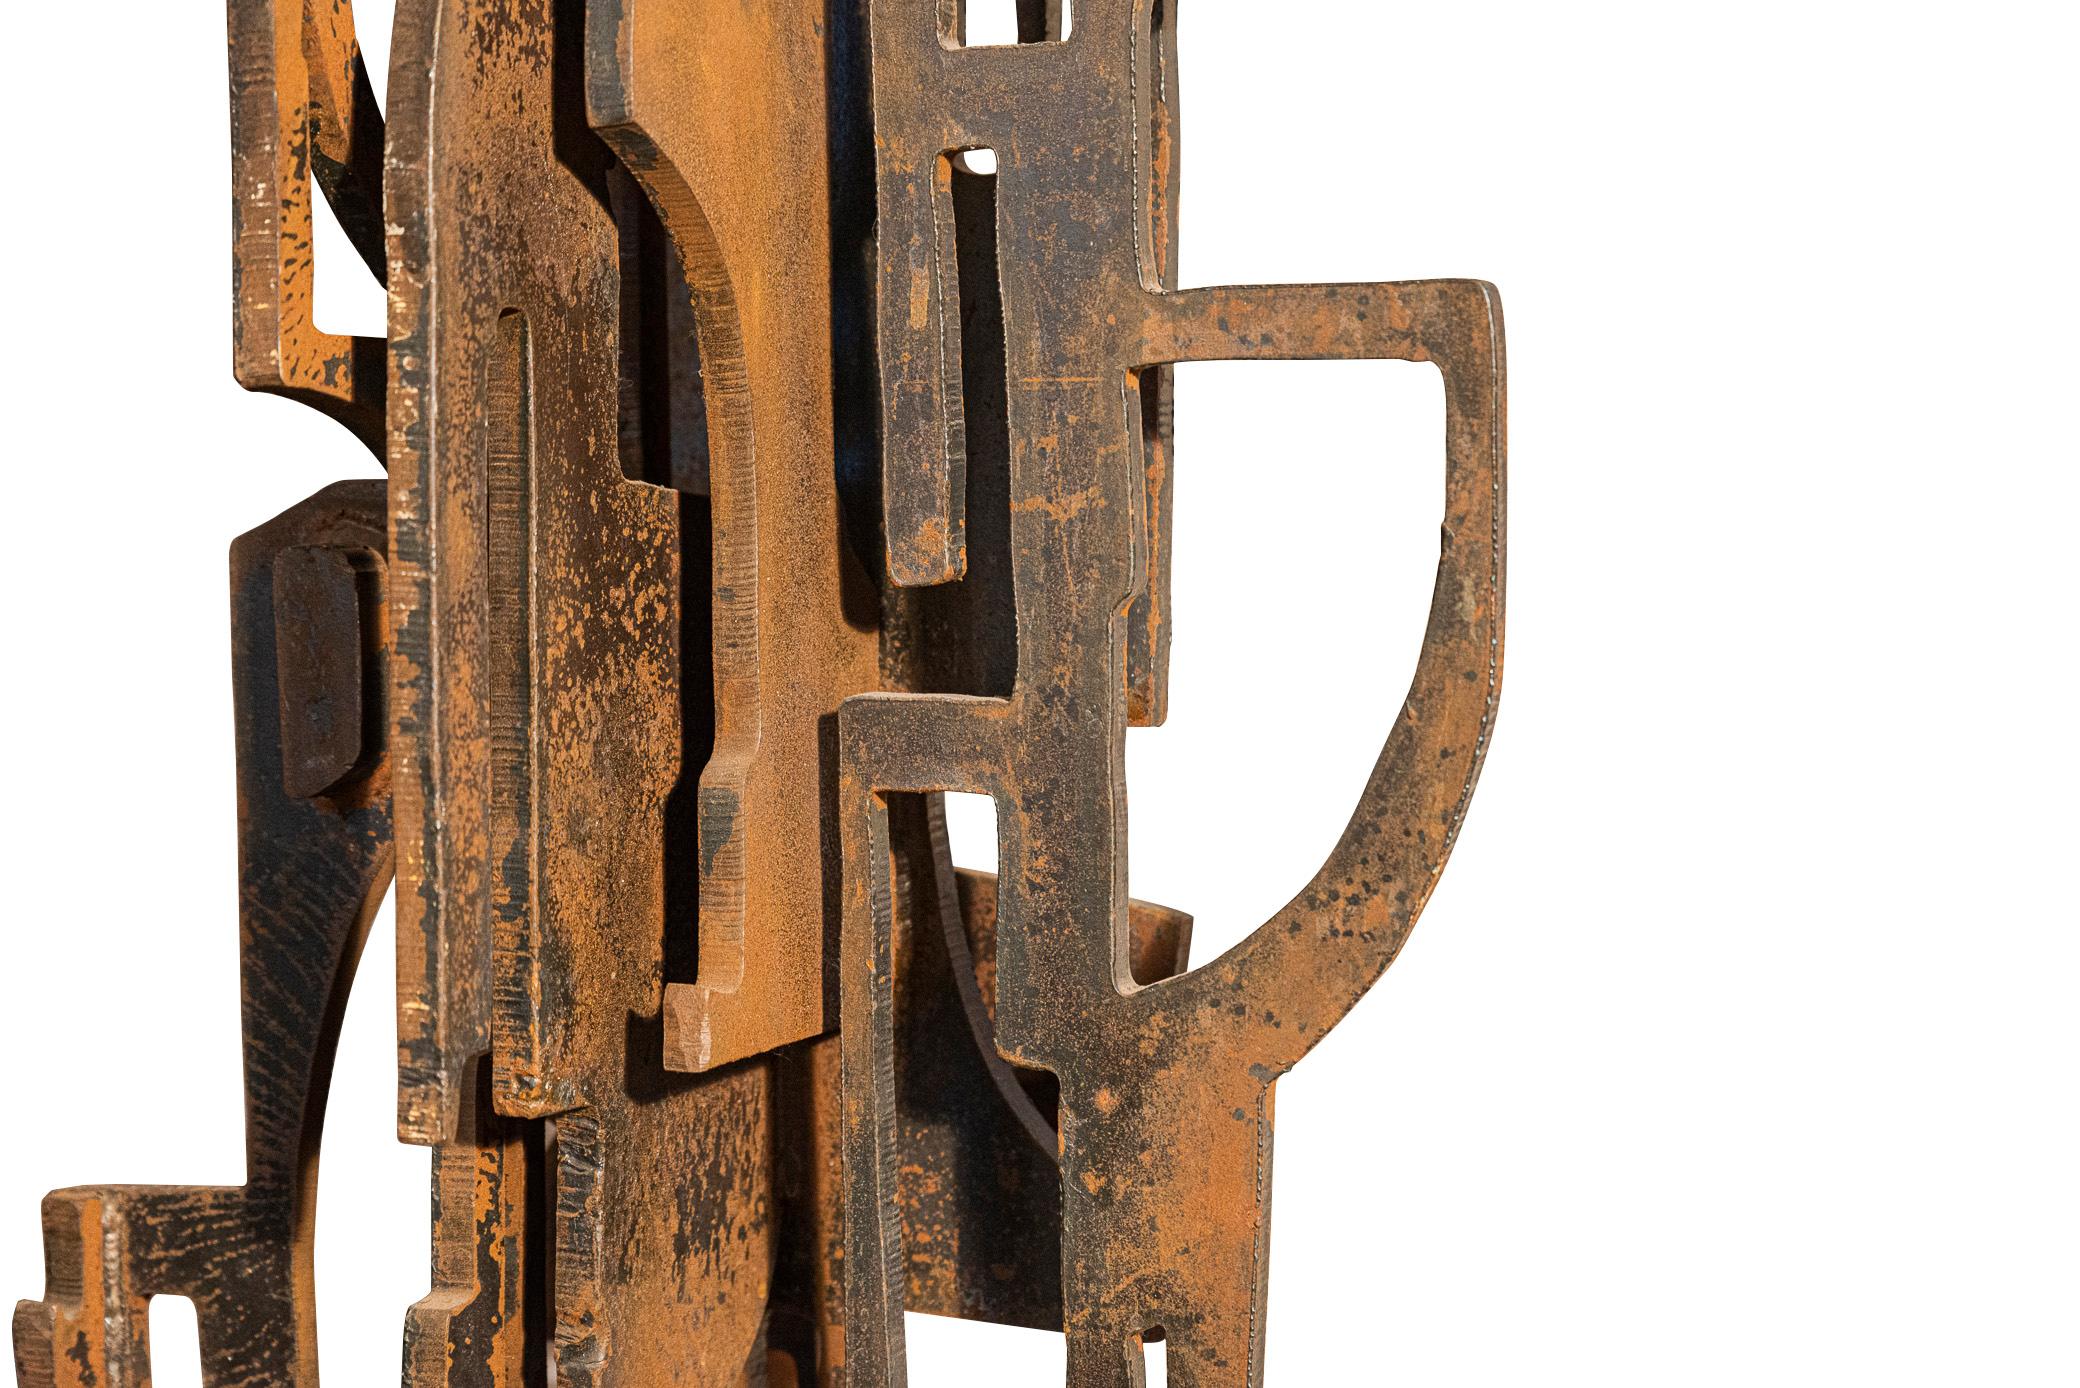 Roberto Aloi (1897-1981), Abstract Sculpture, 
Patinated metal,
with geometric openwork decoration,
circa 1965, Italy.

Measures: Height 158, Width 54 cm, Depth 30 cm.

Aloi Roberto (1897-1981) Italian painter and sculptor. Aloi is an indipendent